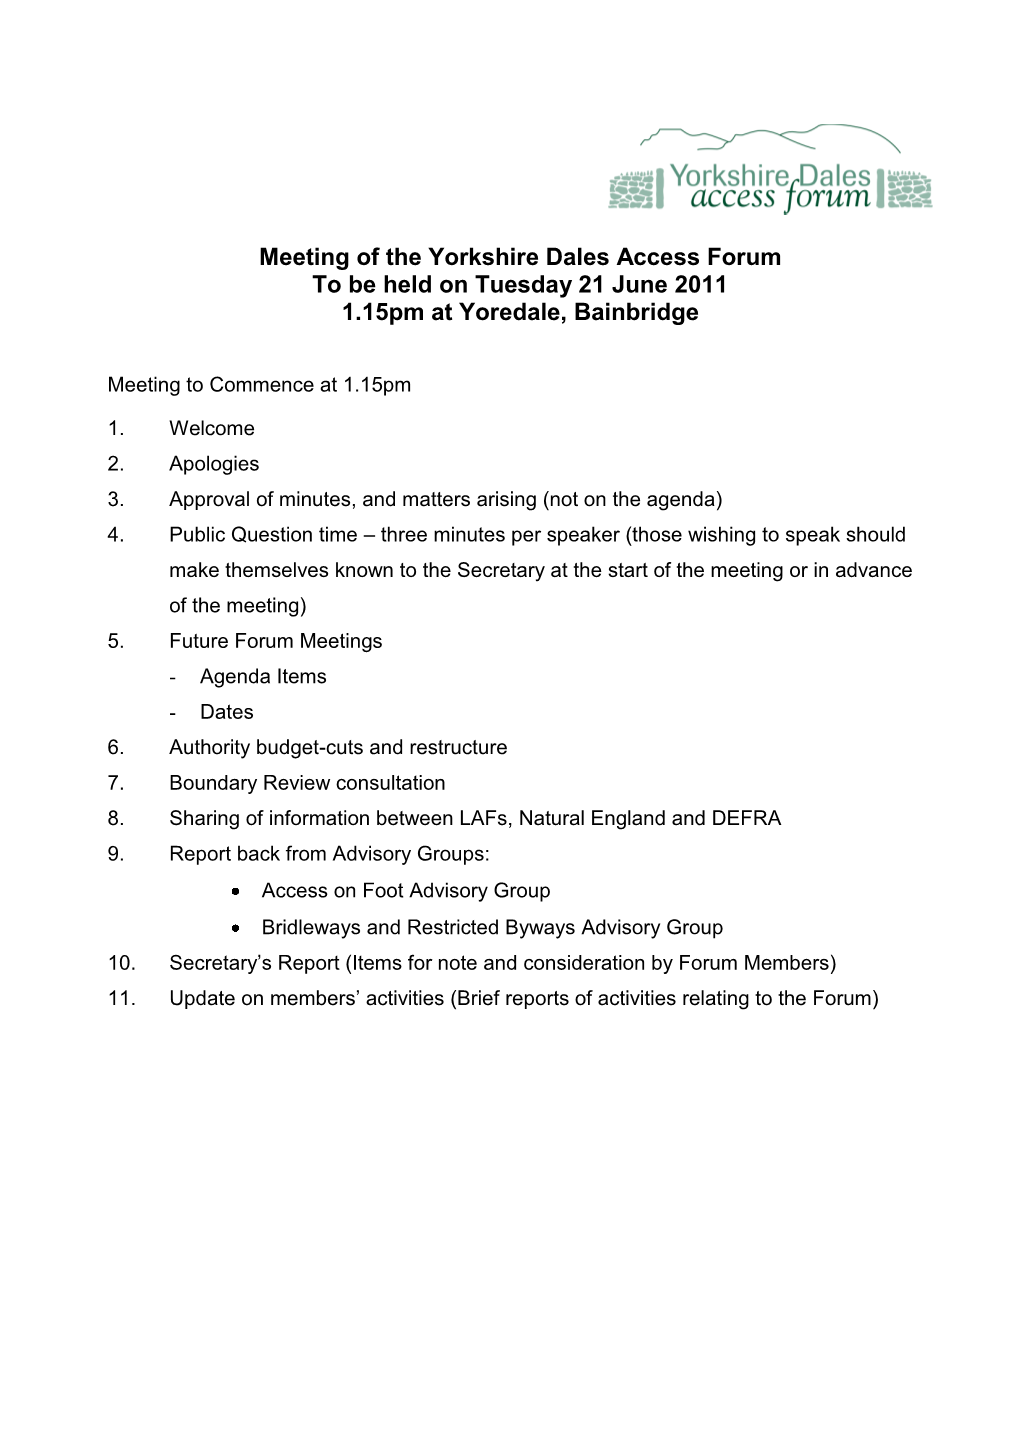 Meeting of the Yorkshire Dales Access Forum to Be Held on Tuesday 21 June 2011 1.15Pm at Yoredale, Bainbridge